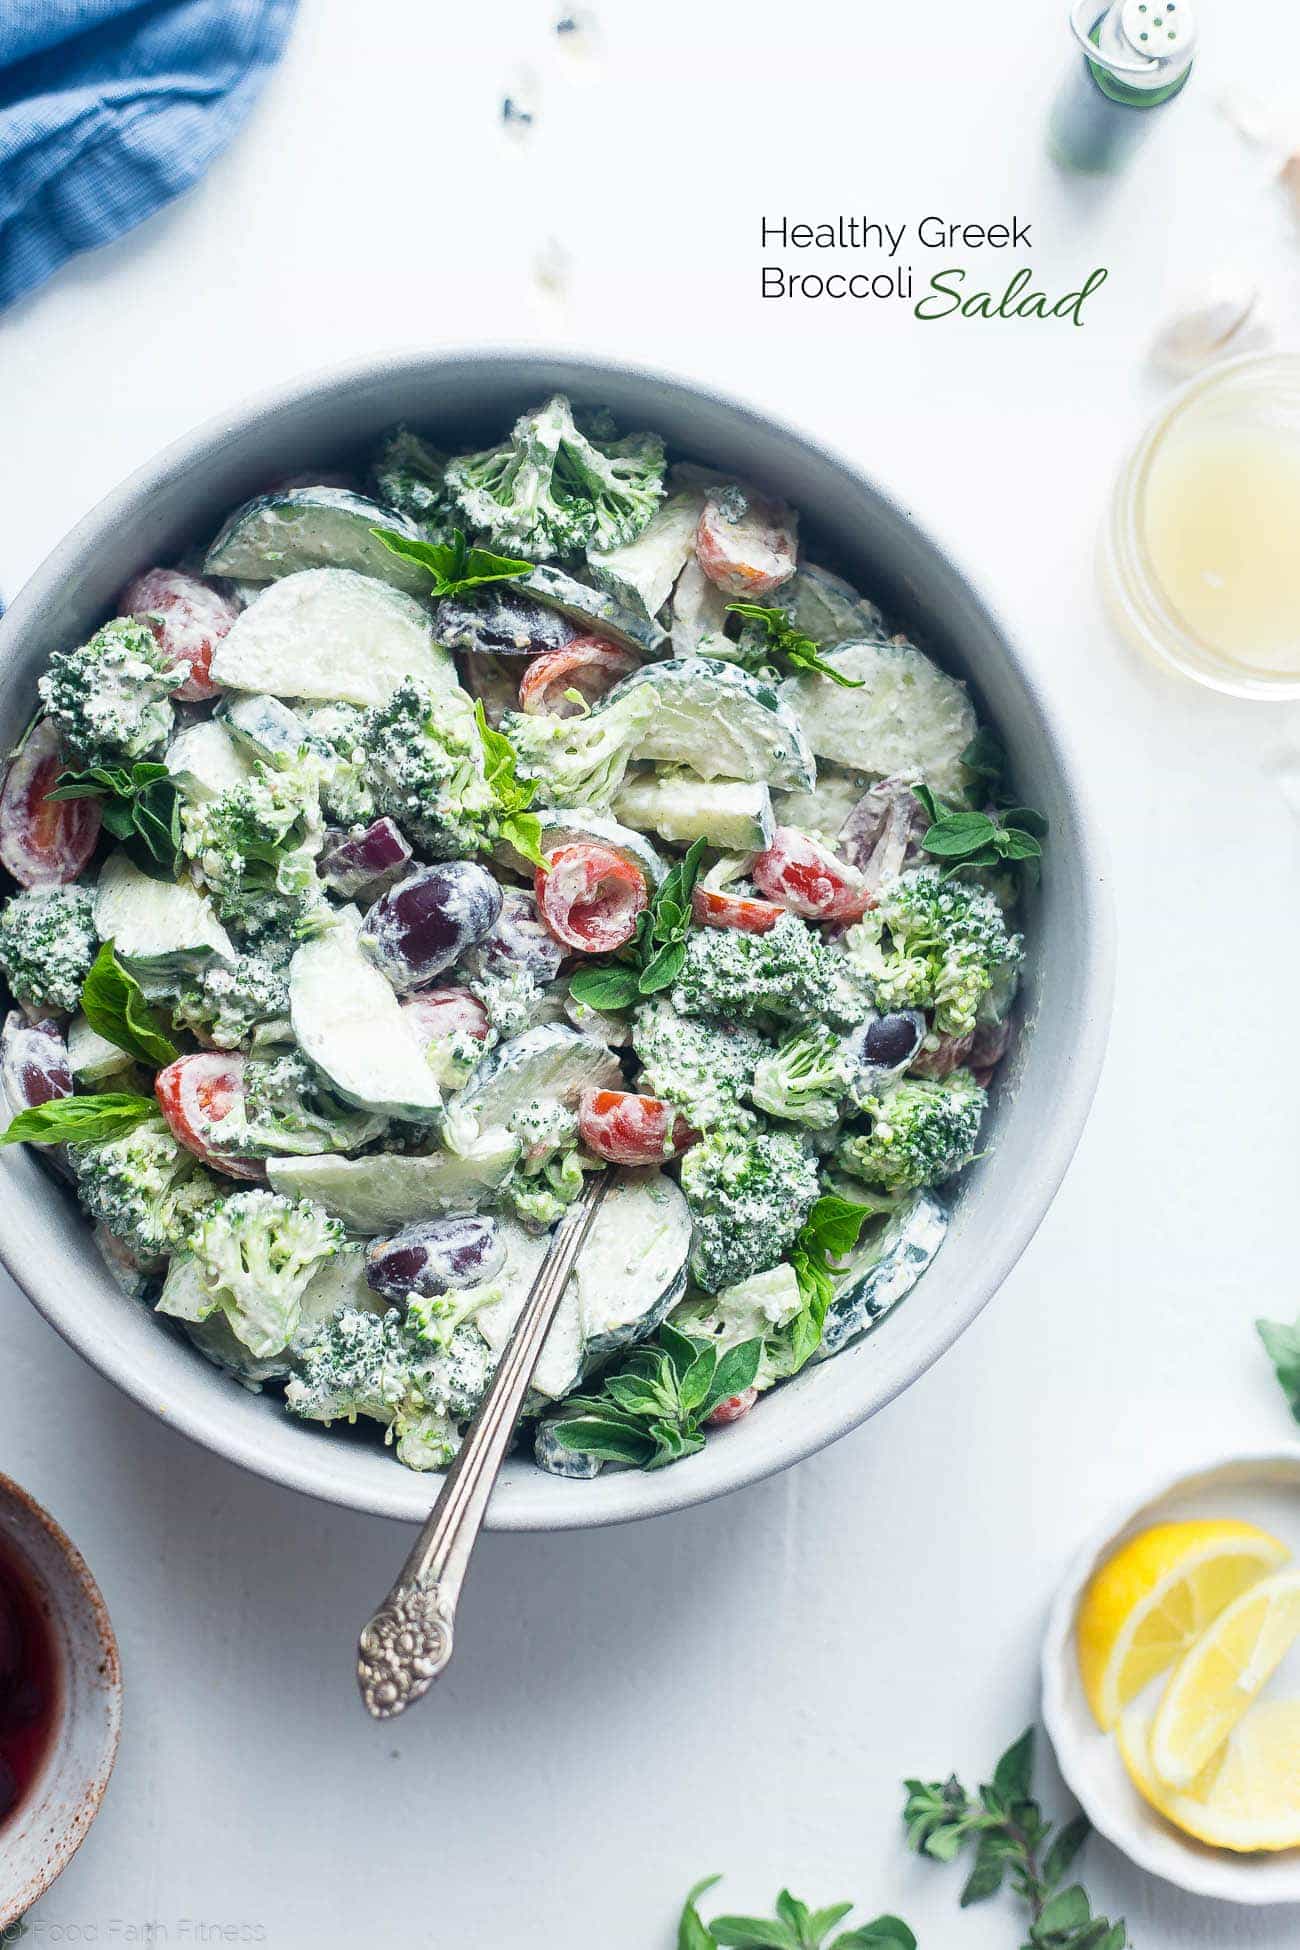 Greek Healthy Broccoli Salad - This low carb, raw broccoli salad is so creamy you'll never know it's vegan, paleo and whole30 compliant! It's an easy side dish that's perfect for spring potlucks! | Foodfaithfitness.com | @FoodFaithFit